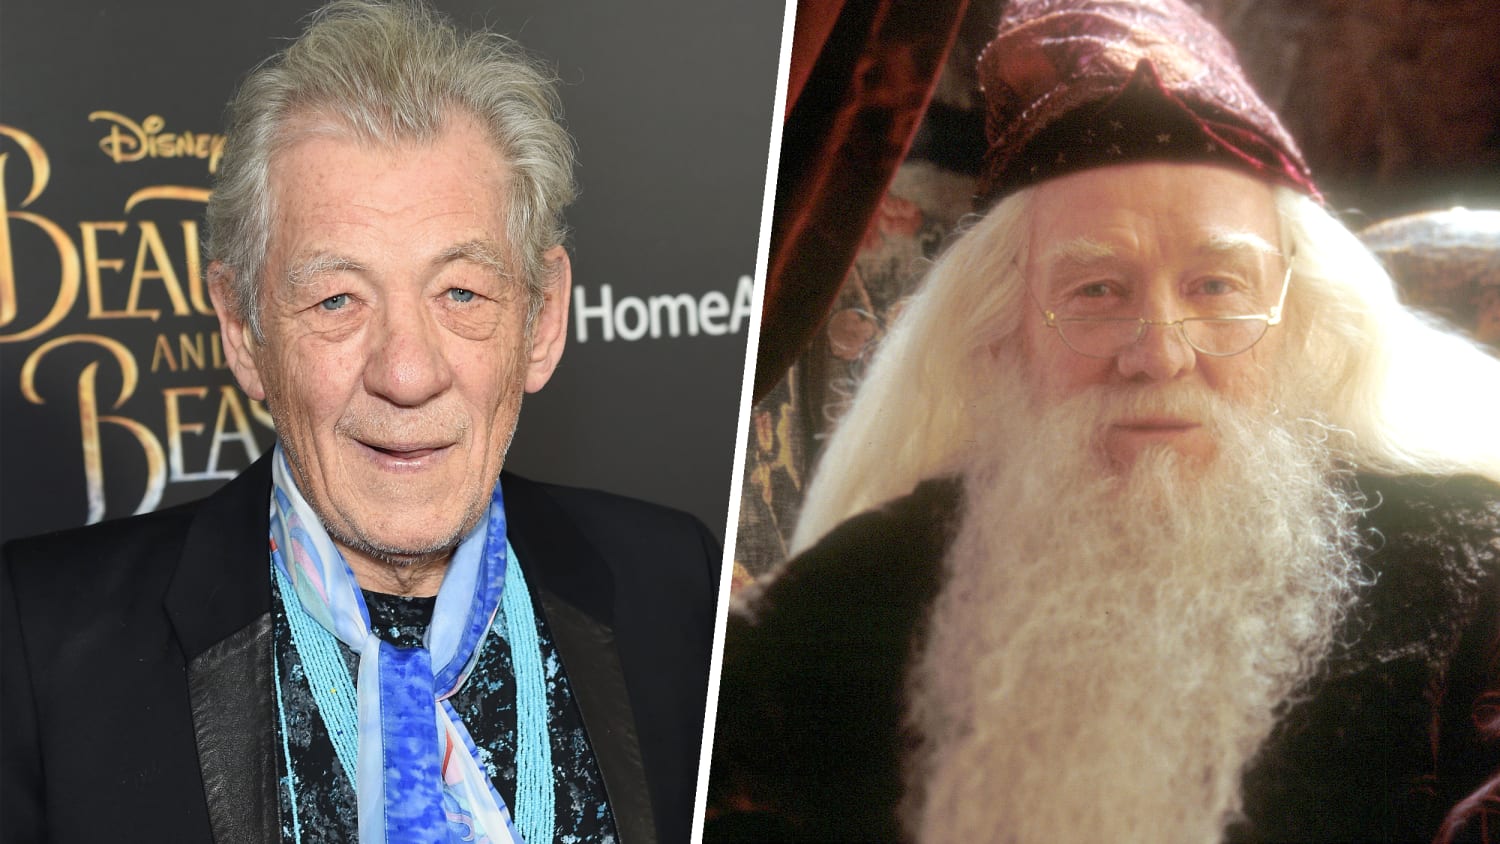 Here's why Ian McKellen turned down a role in the 'Harry Potter' movies